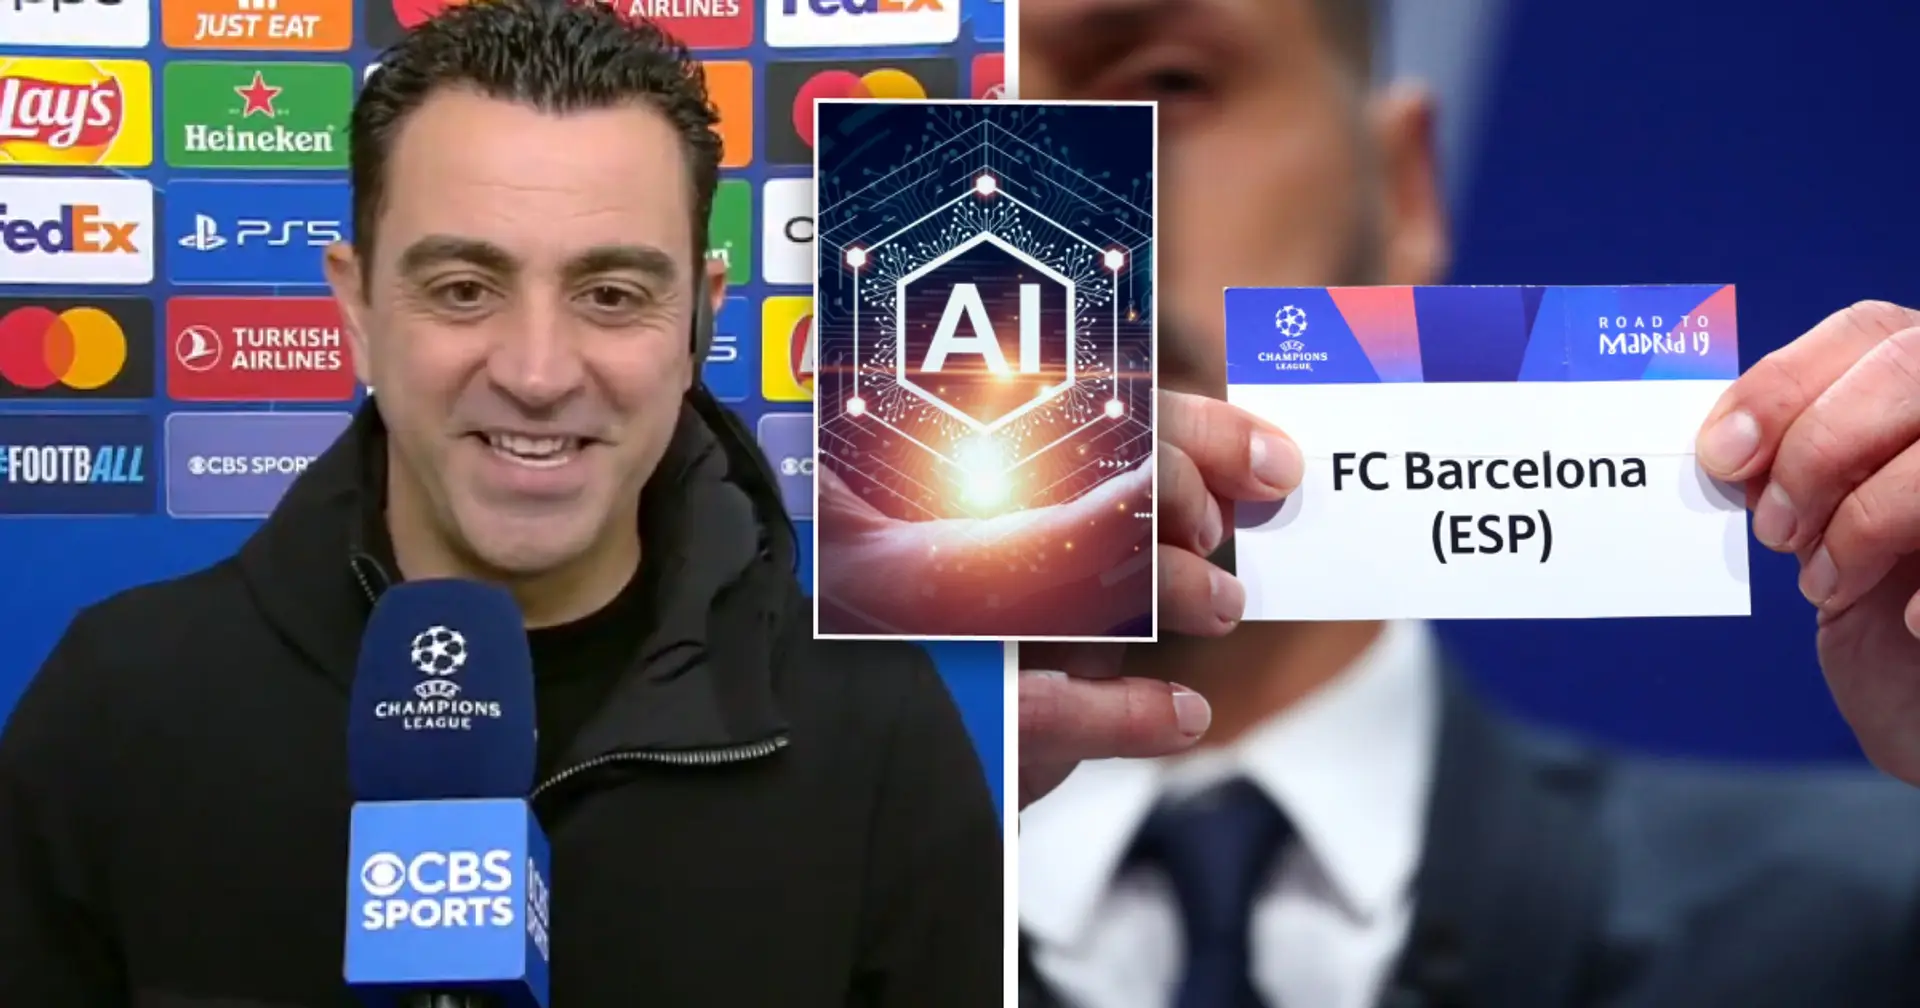 Artificial Intelligence makes shocking Champions League prediction about Barca